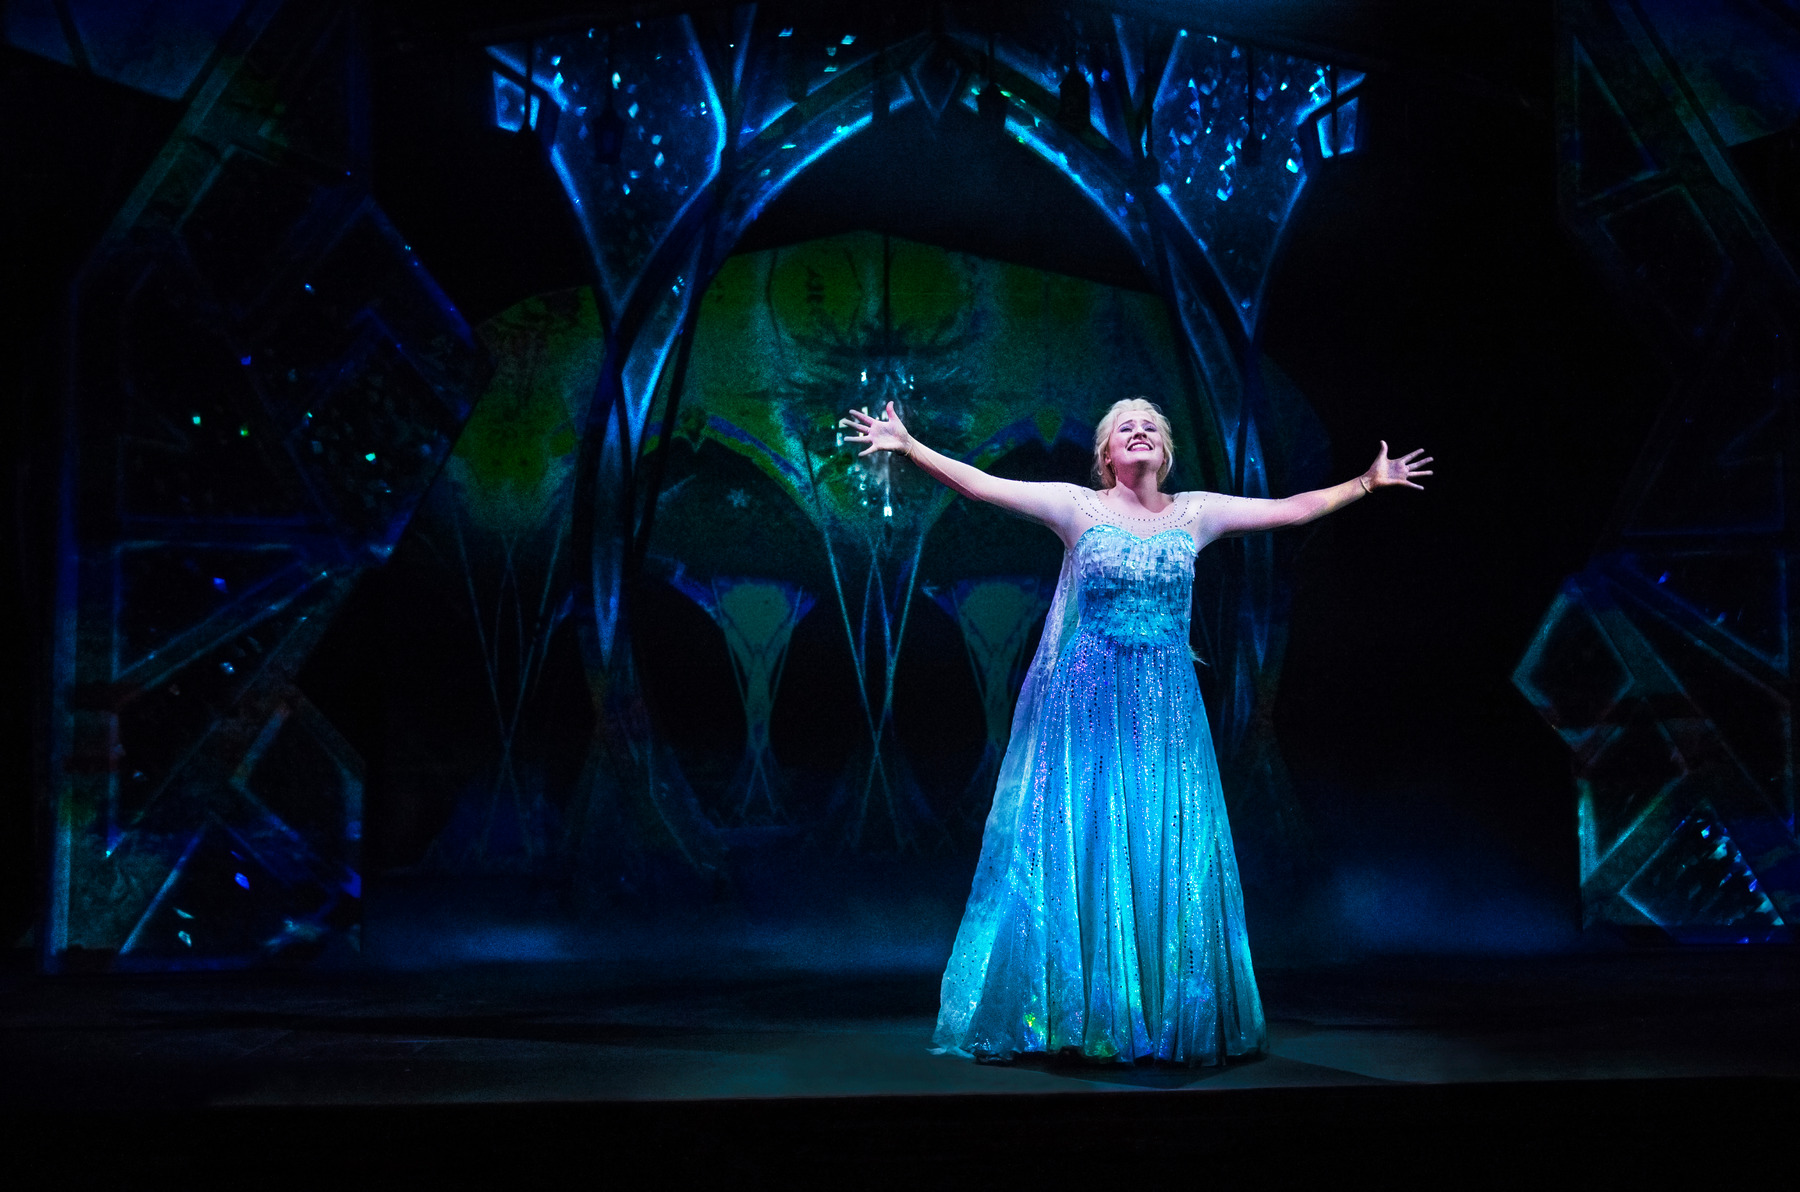 The "Frozen a musical spectacular" show on Disney Dream and Disney Wonder